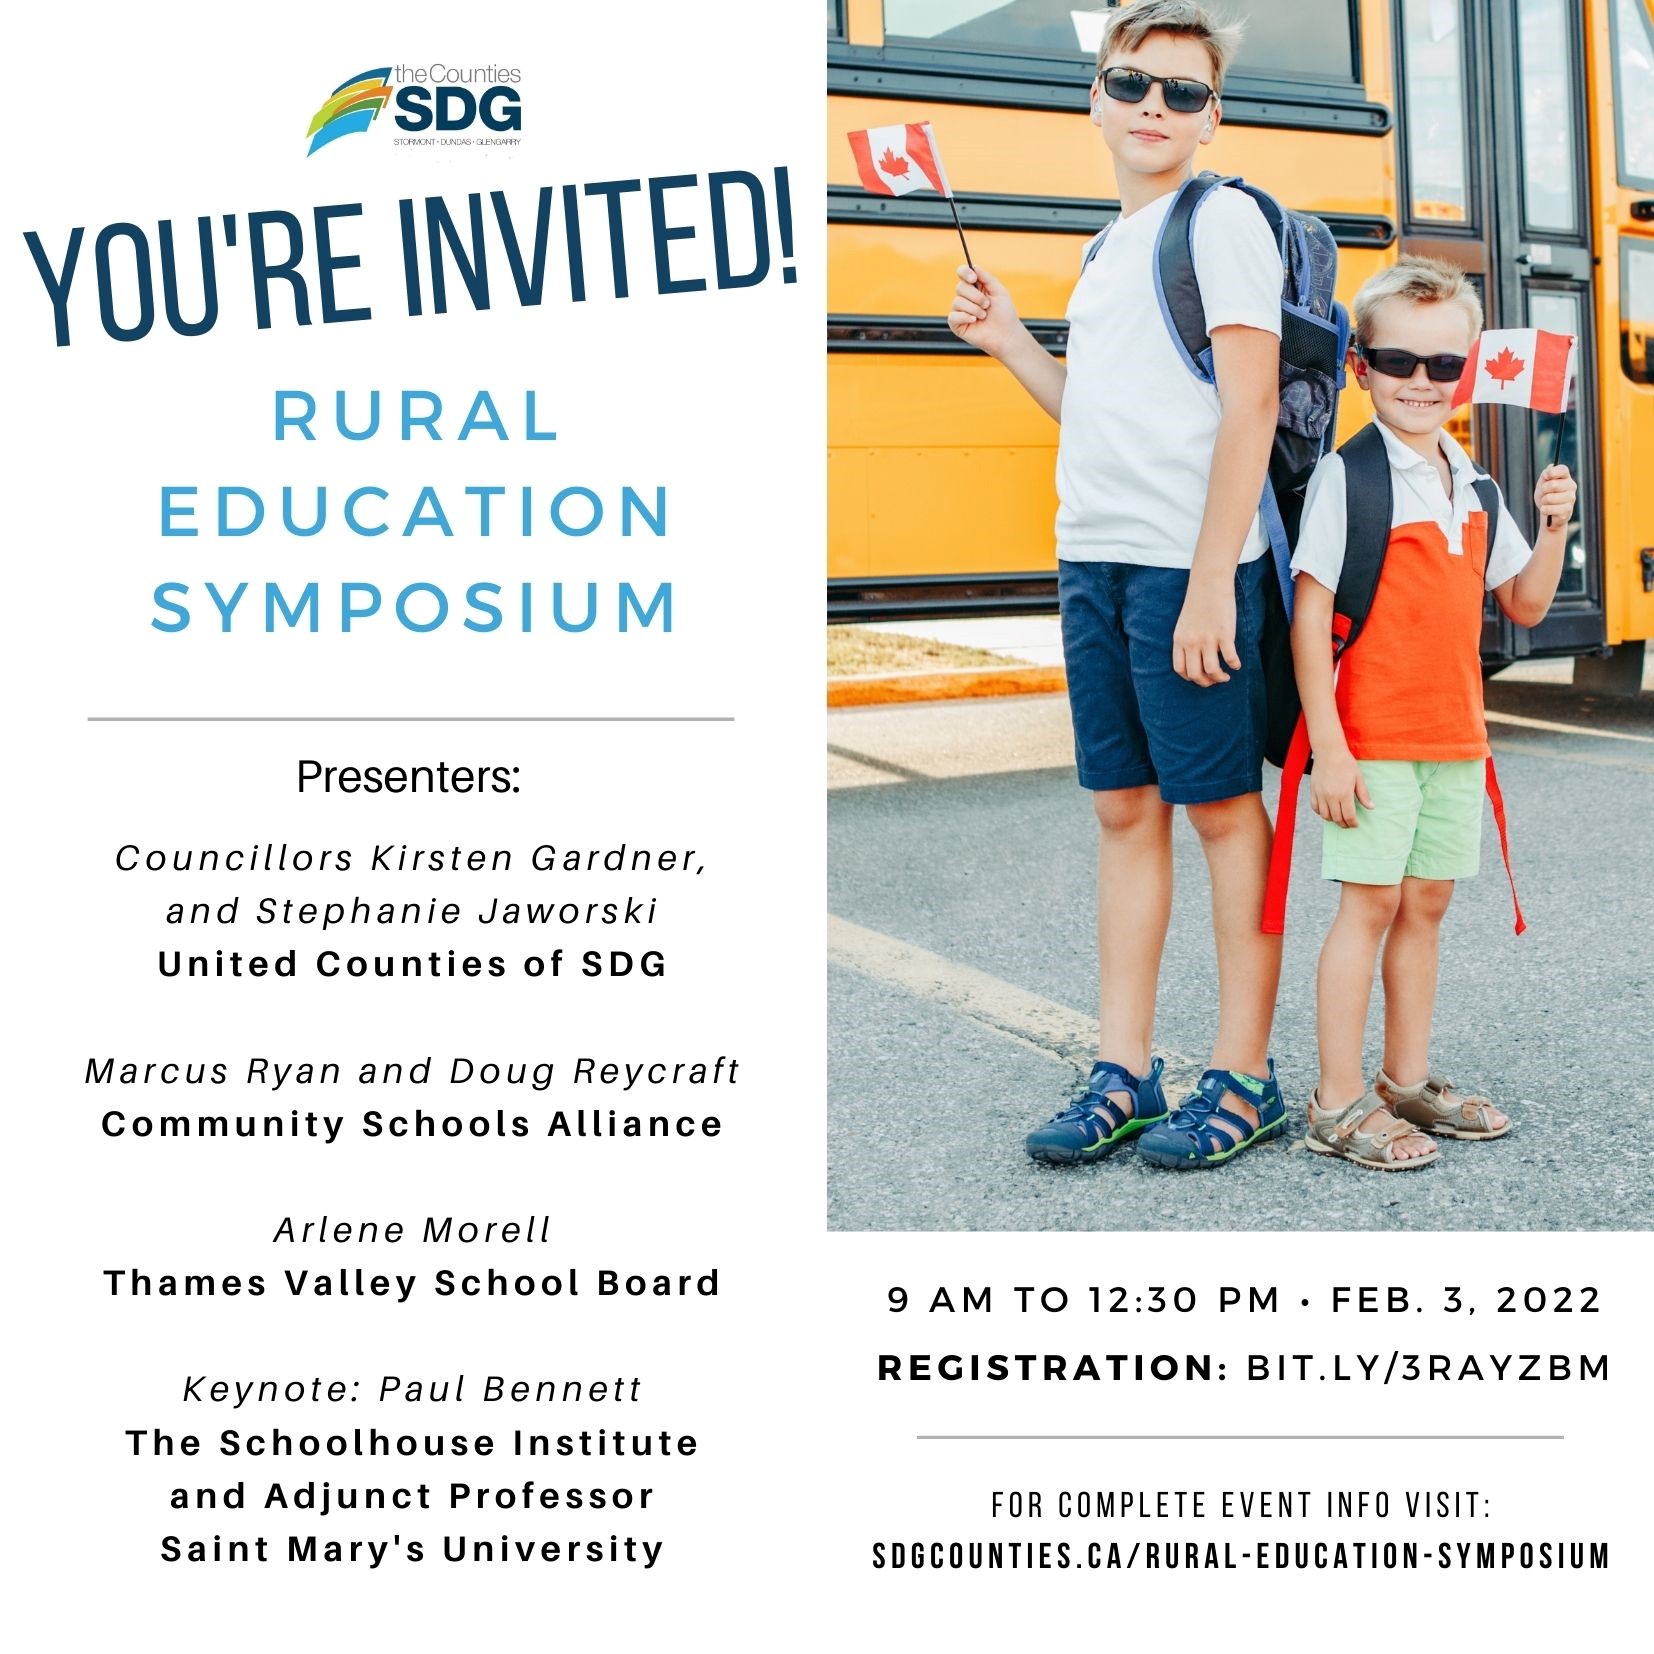 Symposium Poster with details and yellow school bus